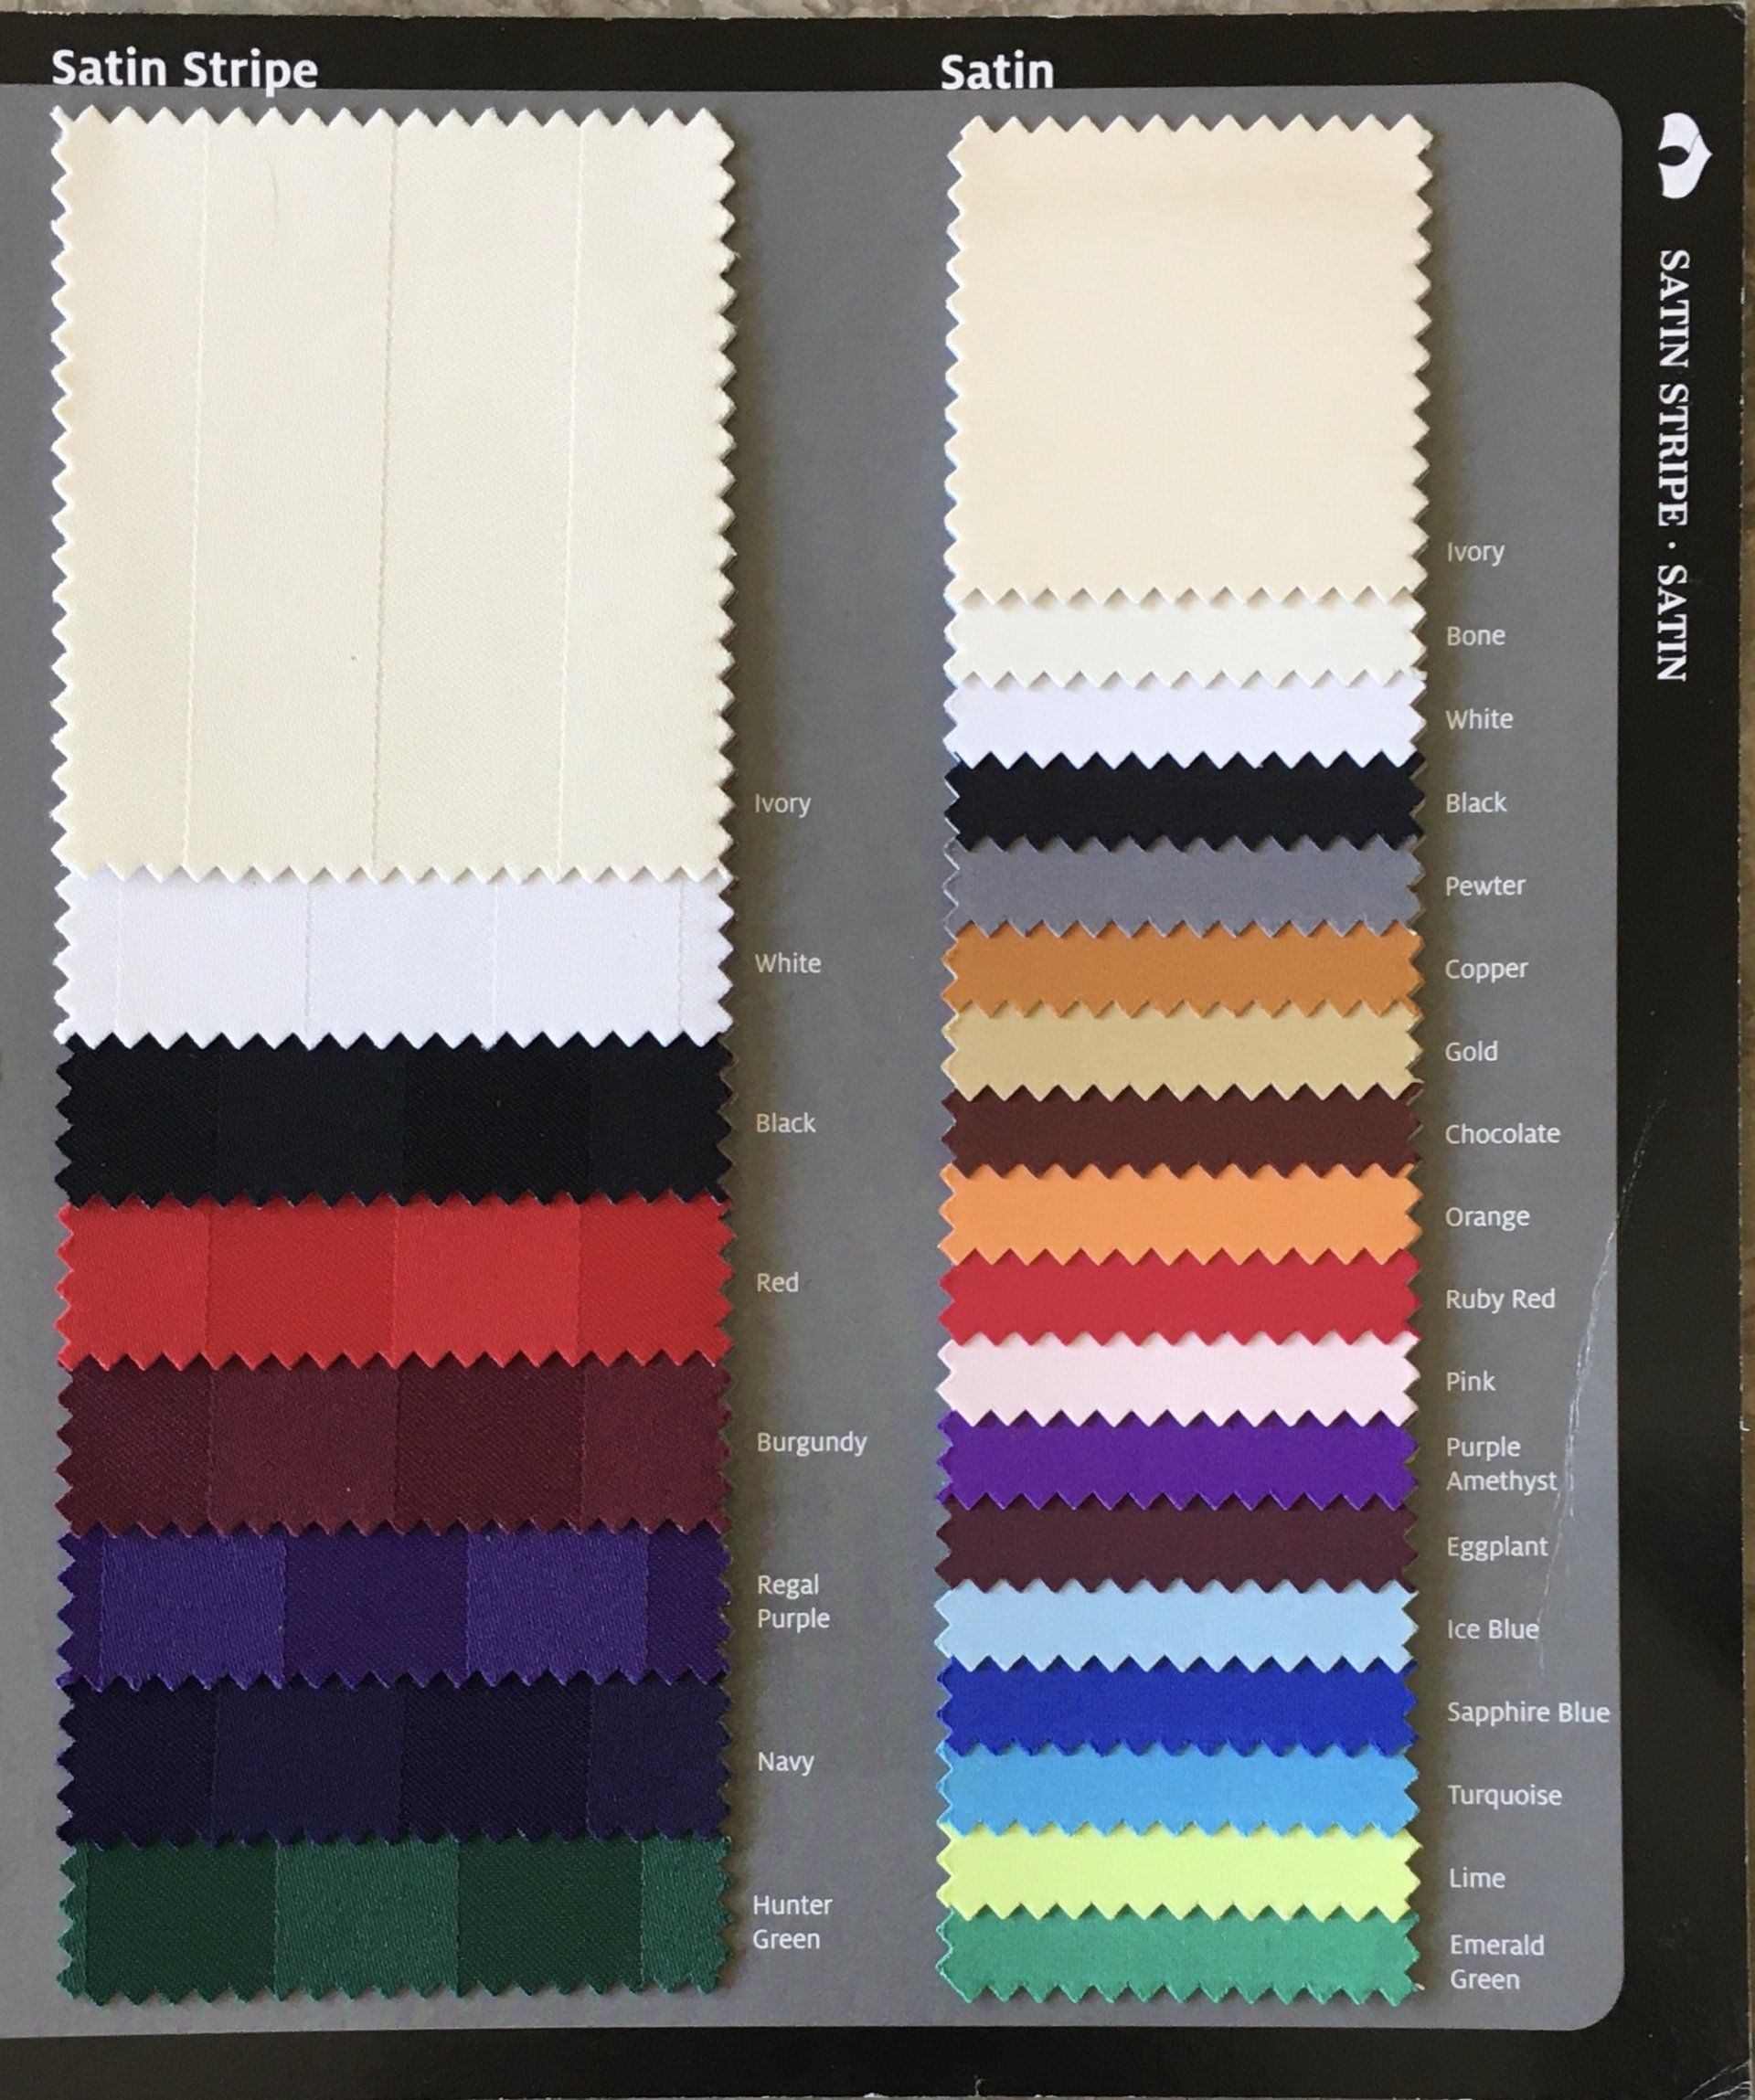 satin stripe and satin  linen swatches, offered by Premier Wedding & Party Rental